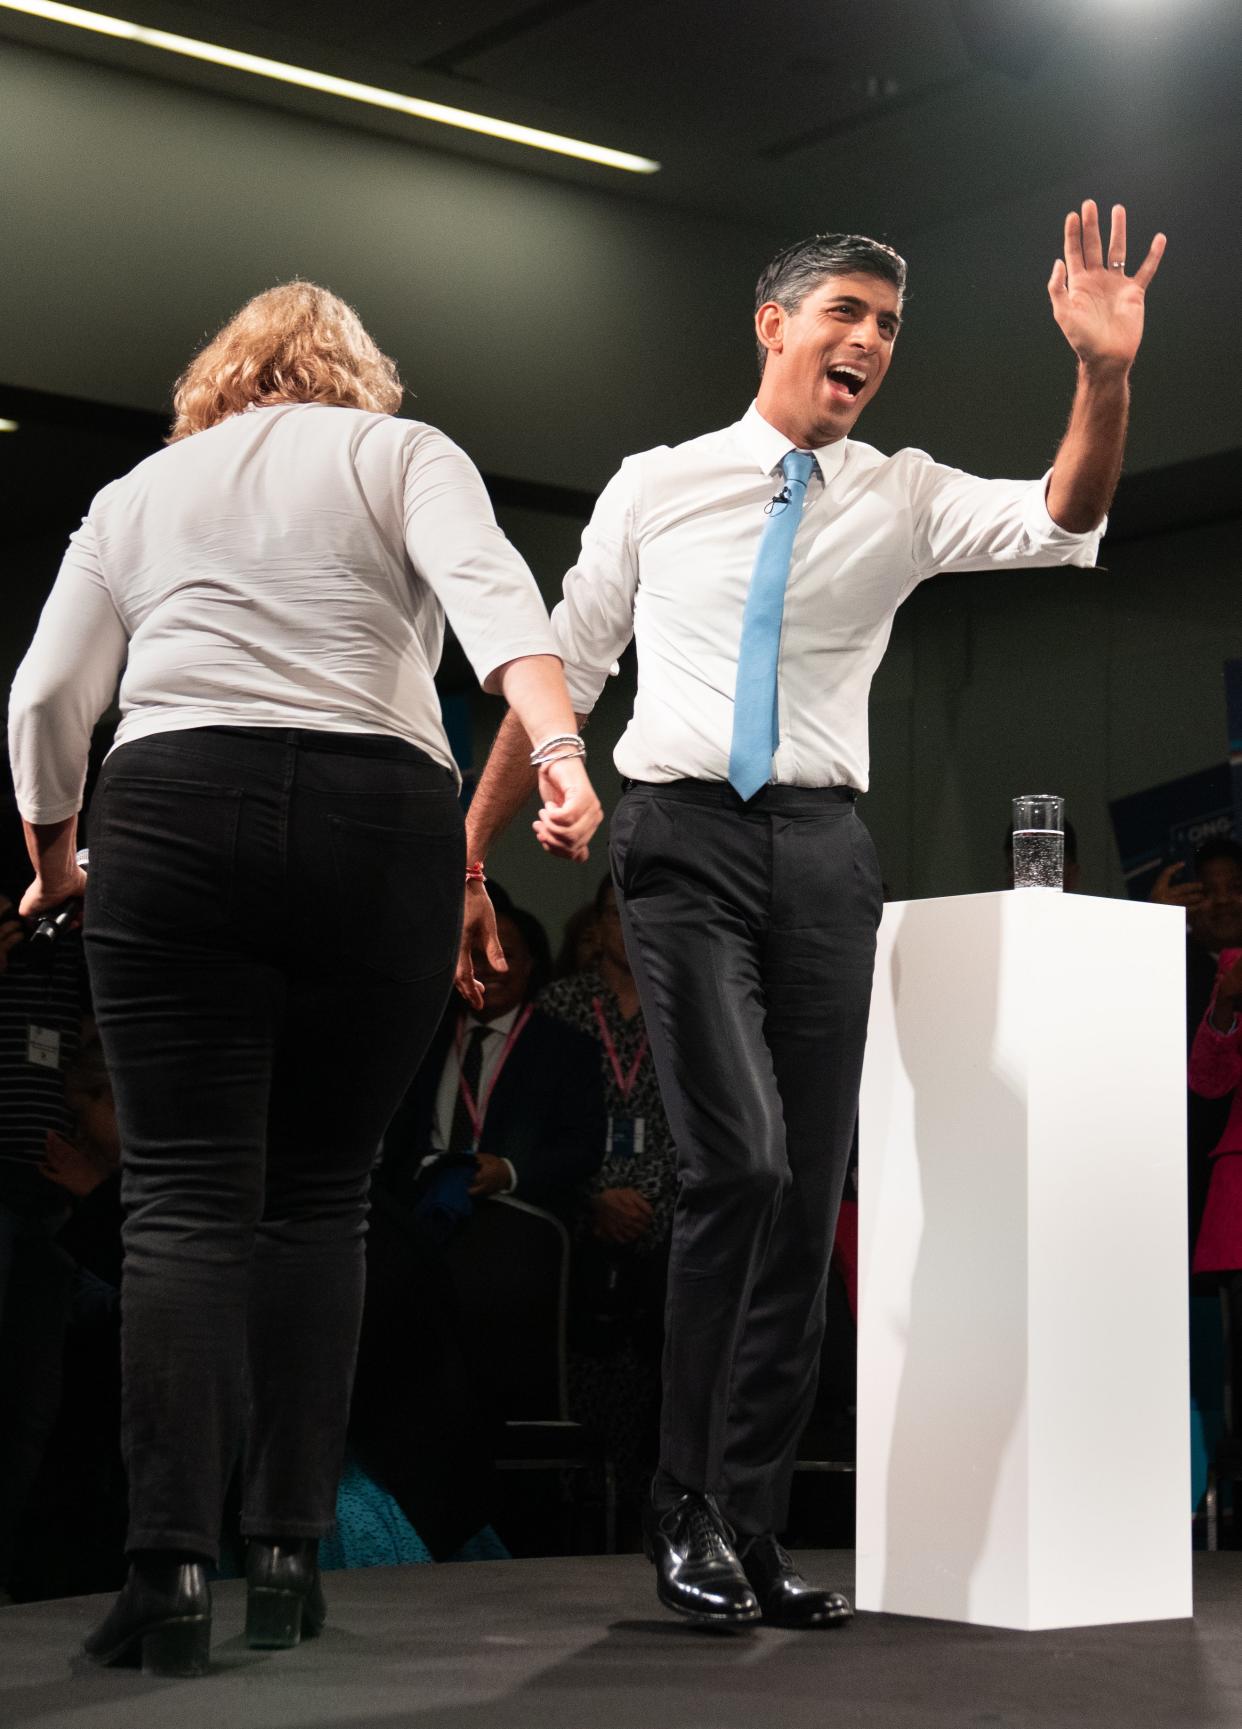 Smile and wave - Prime Minister took to the stage at the Tory Conference in Manchester (Stefan Rousseau/PA Wire)